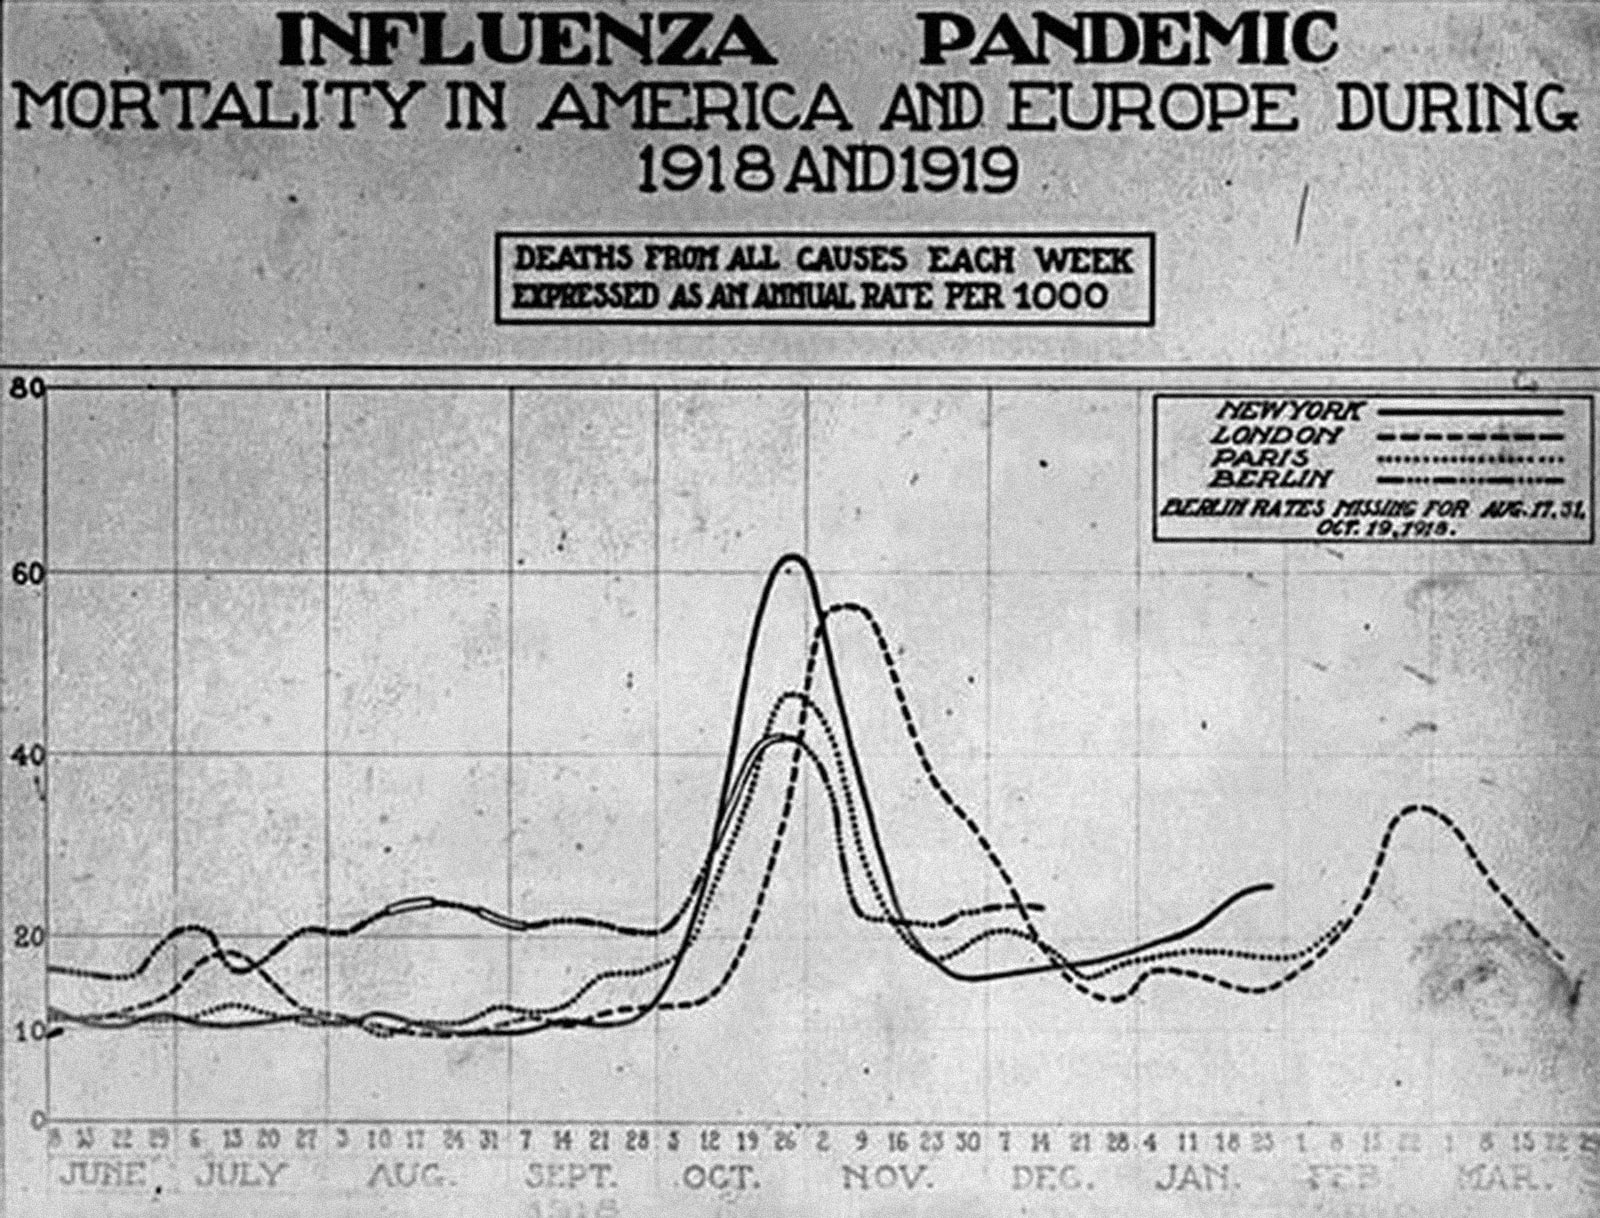 Graph of Influenza Pandemic - Mortality in America and Europe during 1918 & 1919